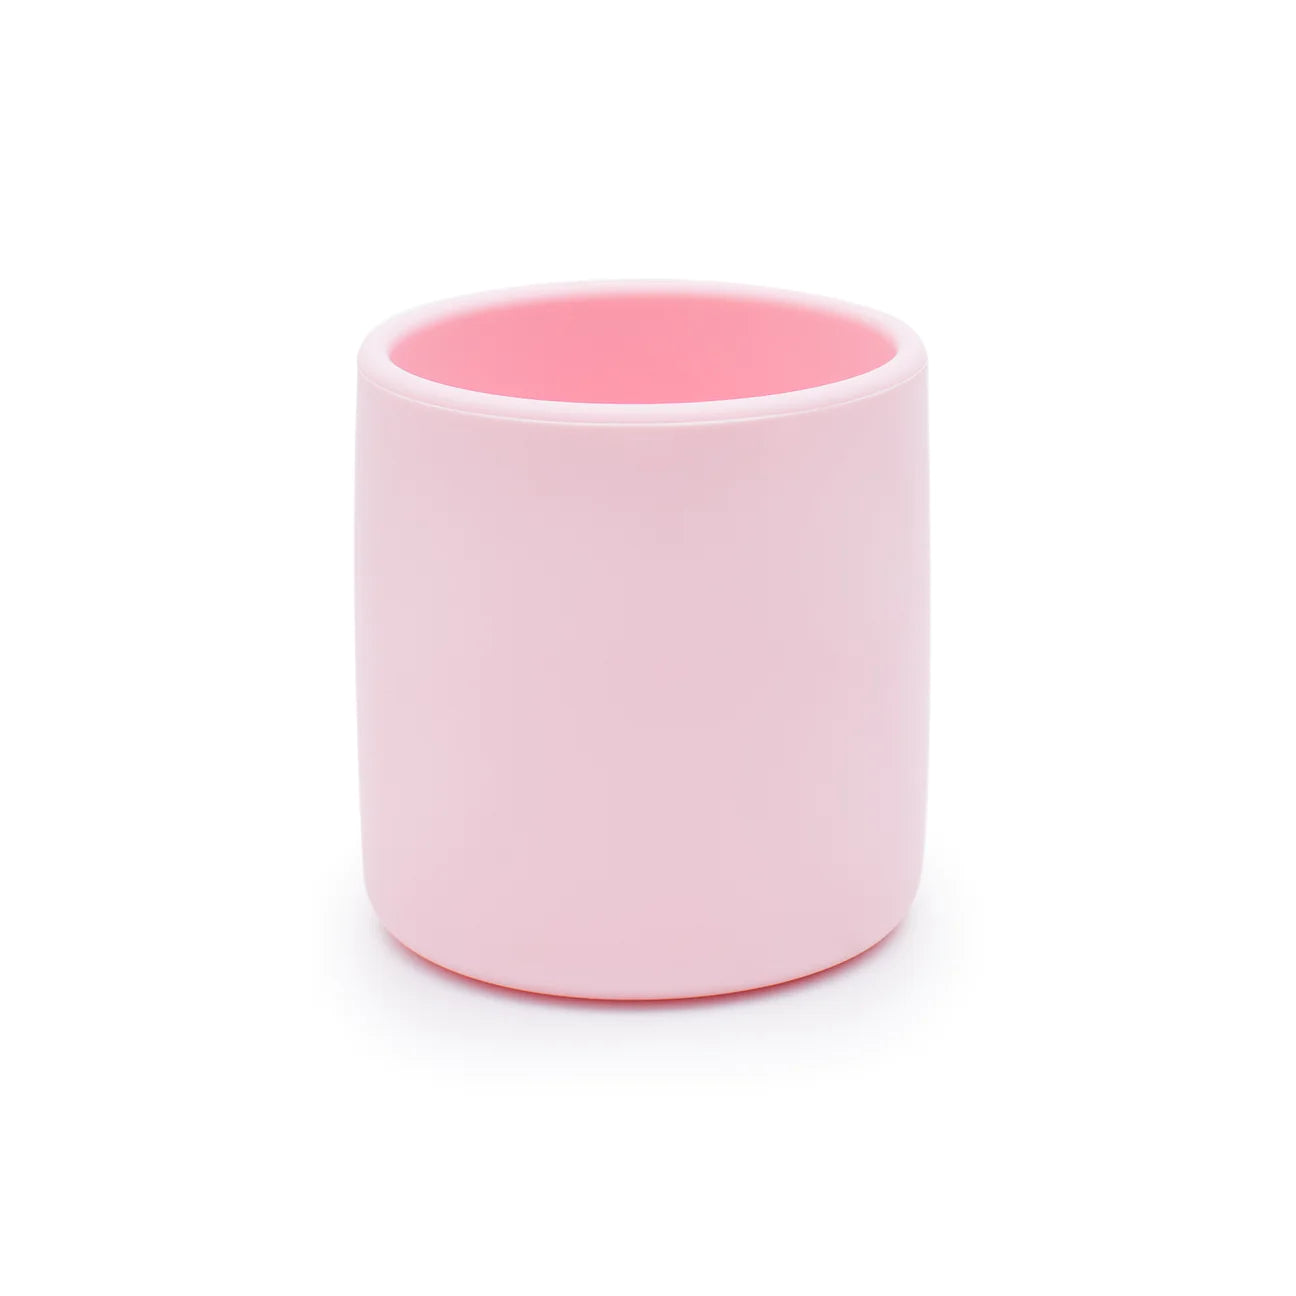 We Might Be Tiny Grip Cup - Powder Pink